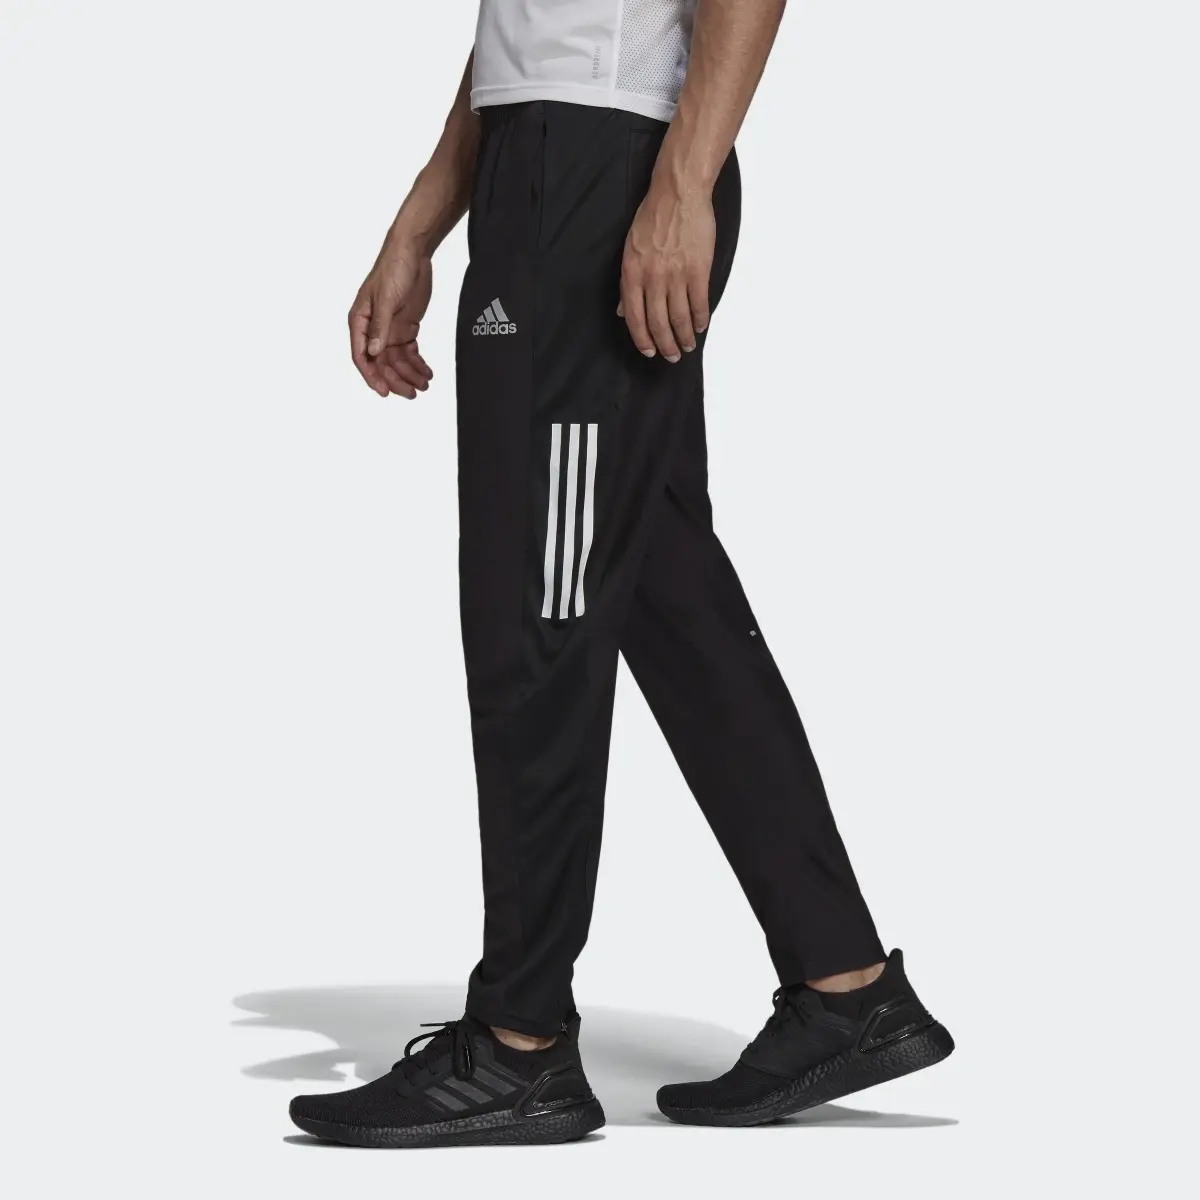 Adidas Own The Run Astro Wind Joggers. 2